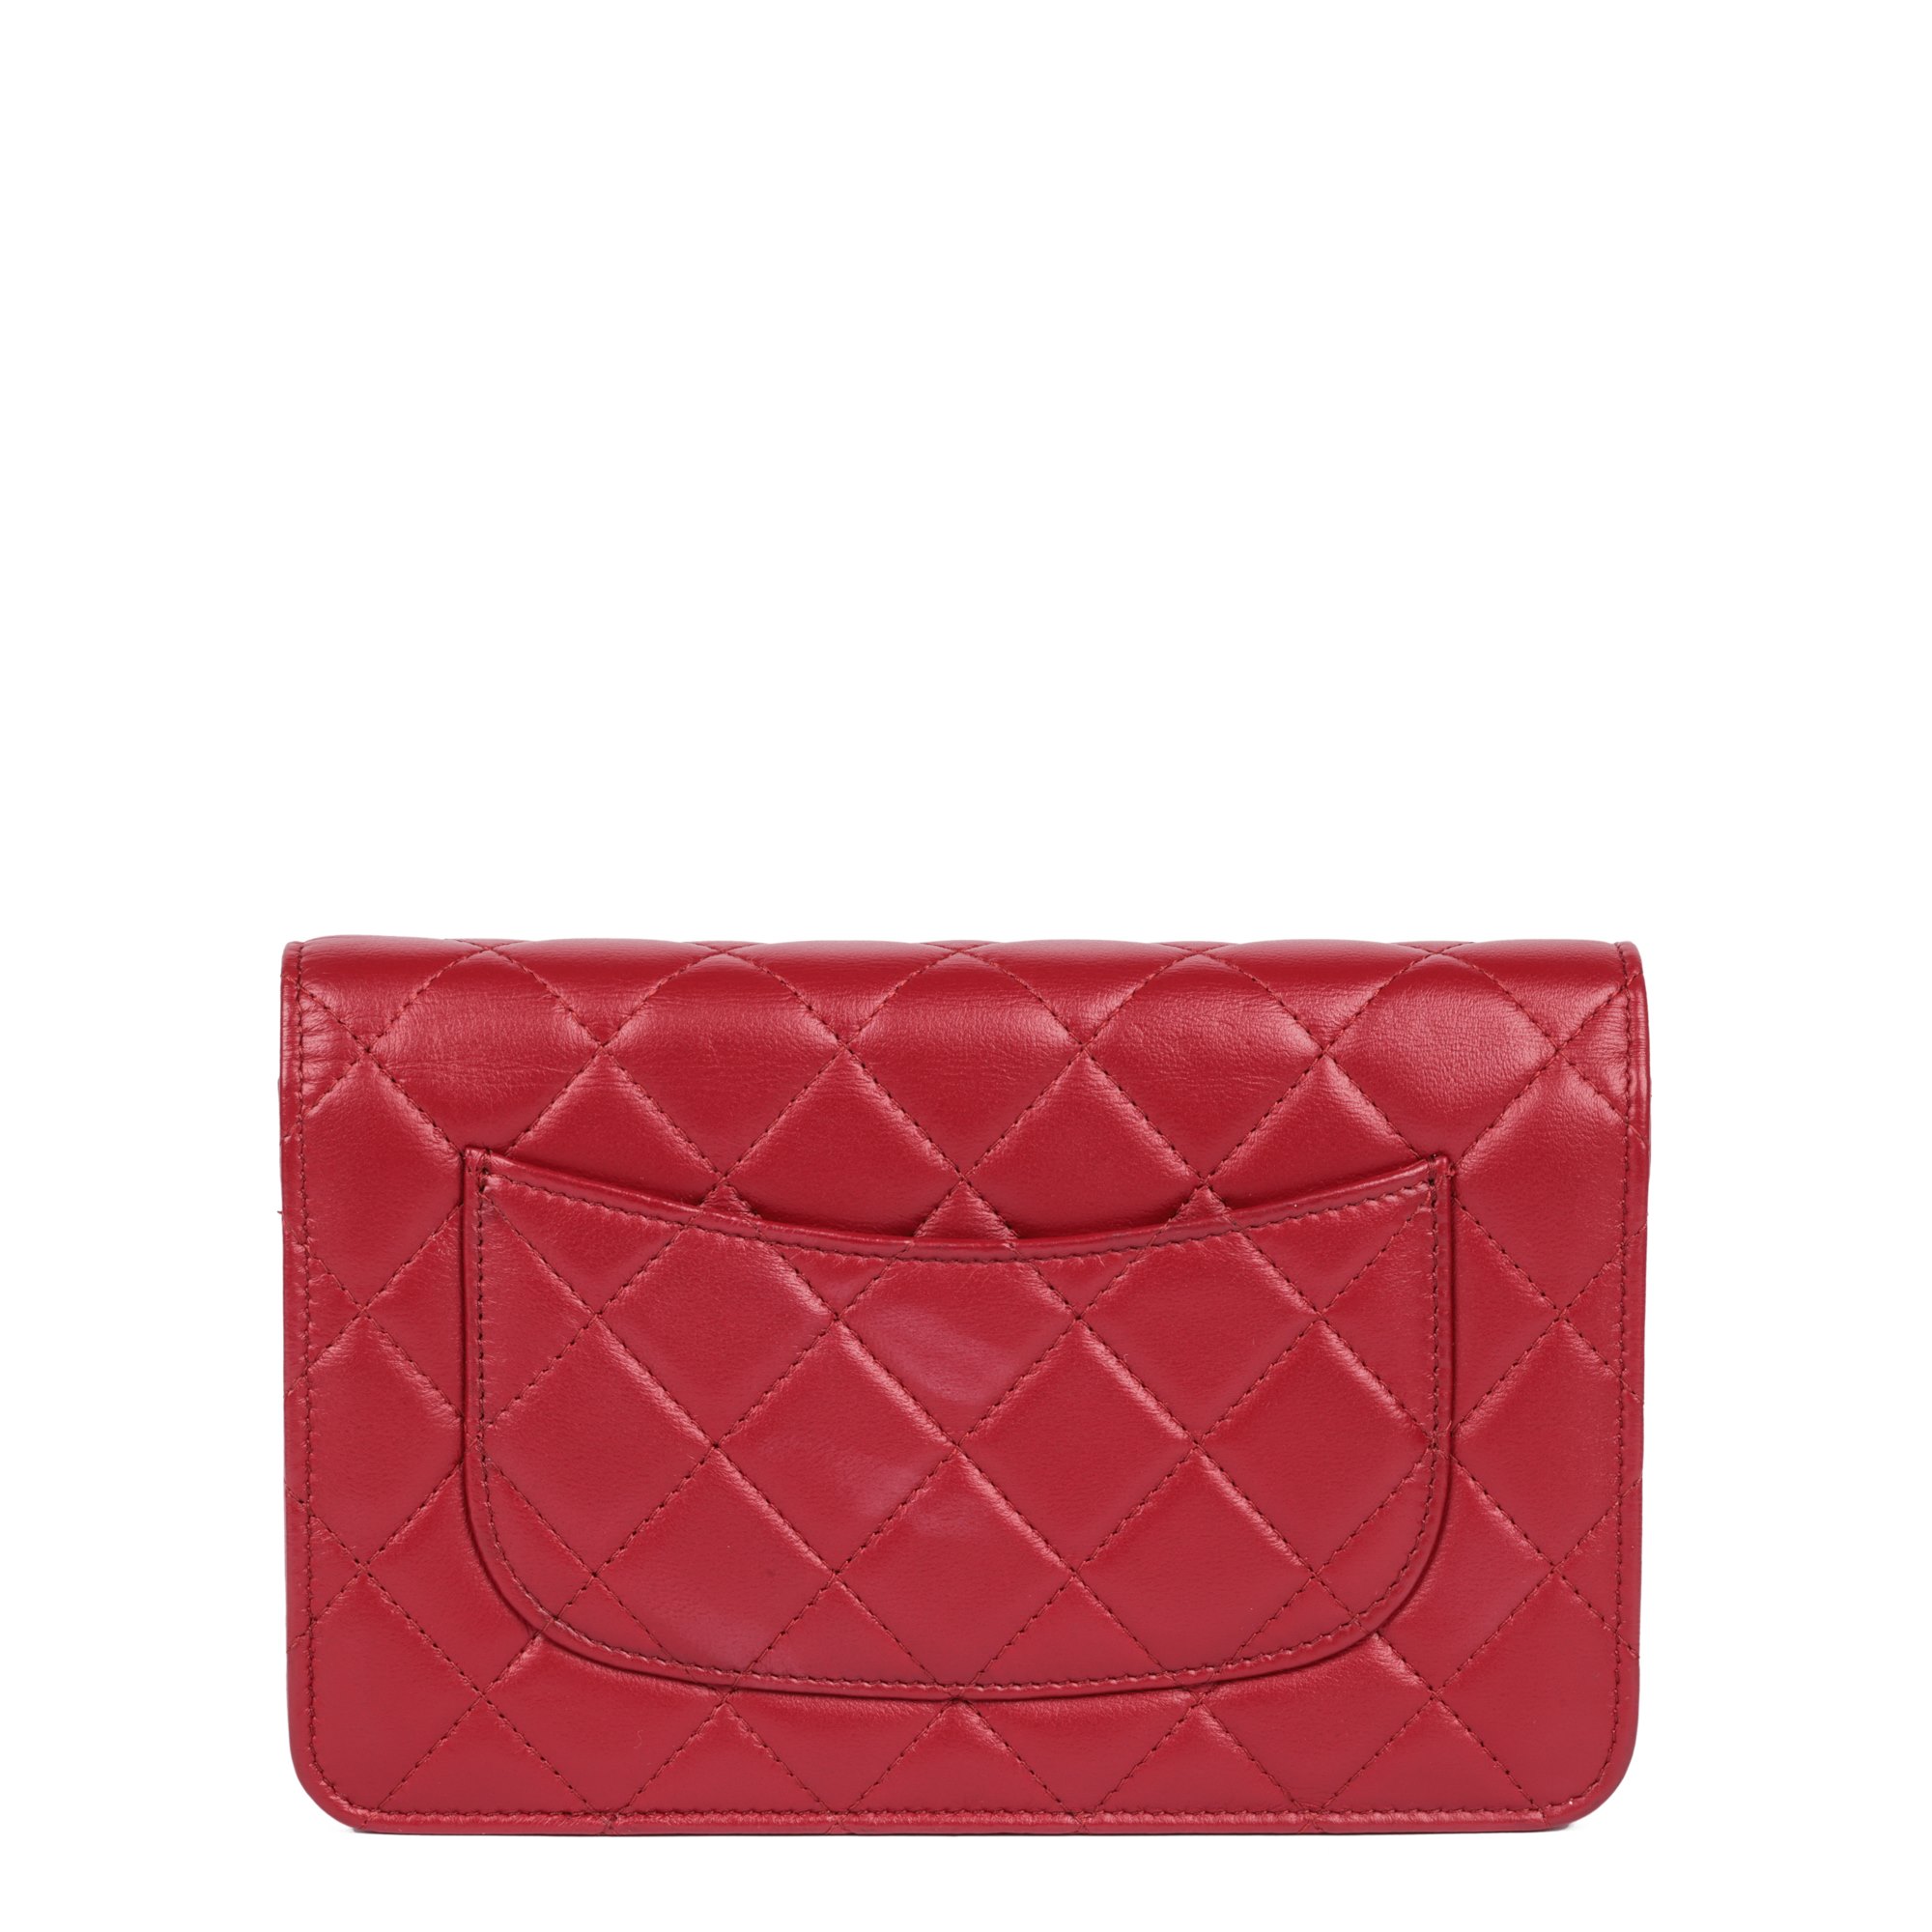 Chanel Red Quilted Lambskin Leather Wallet-on-Chain WOC